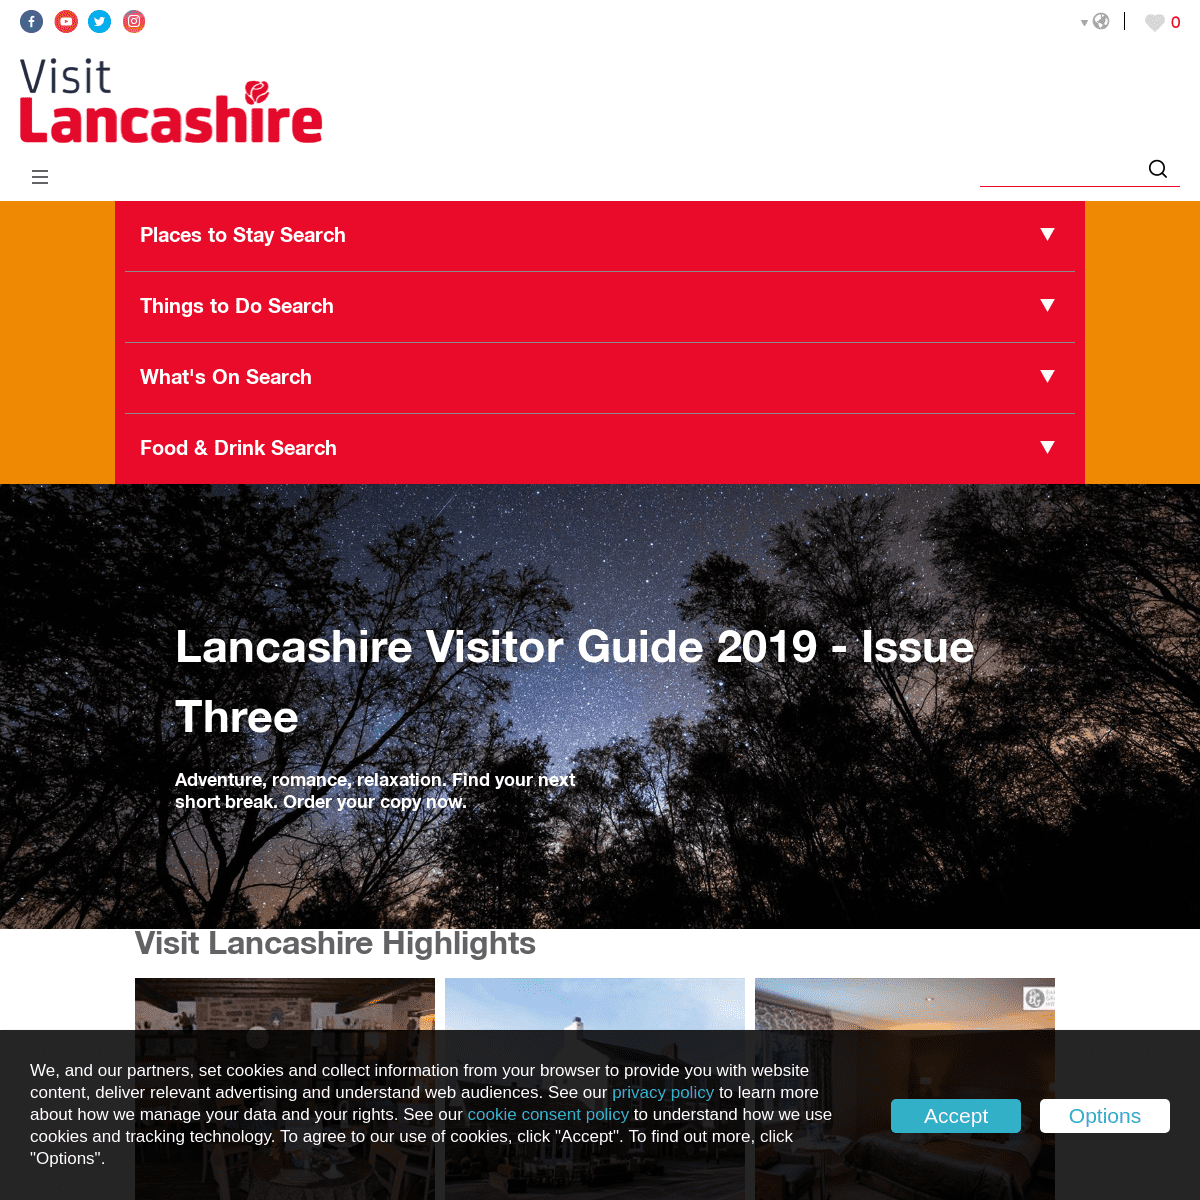 A very warm welcome to Lancashire! - Visit Lancashire